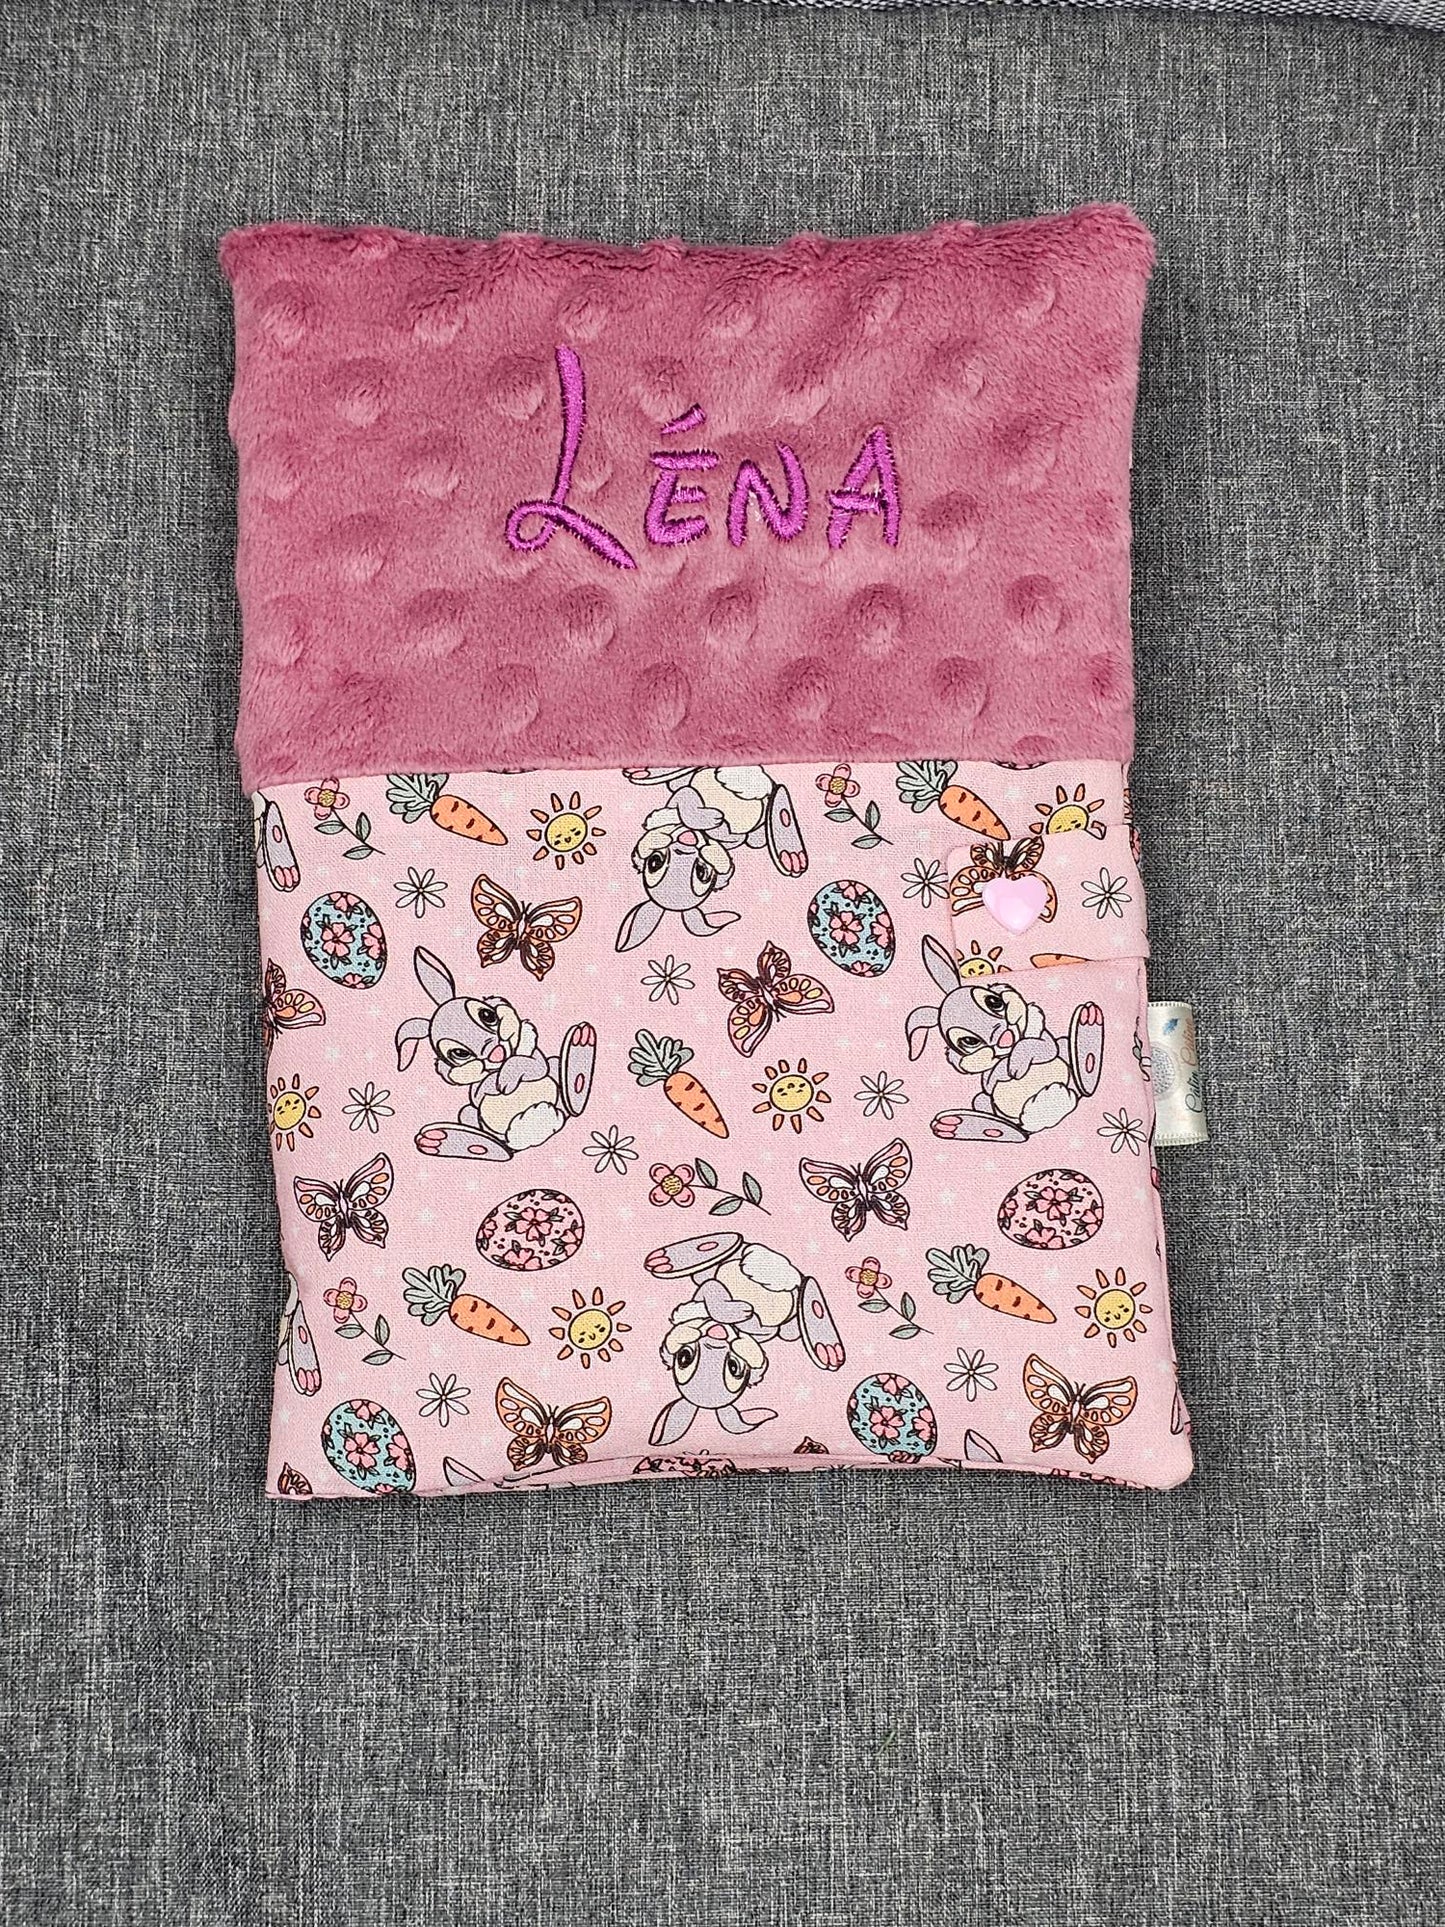 Personalized Theme Notebook Cover